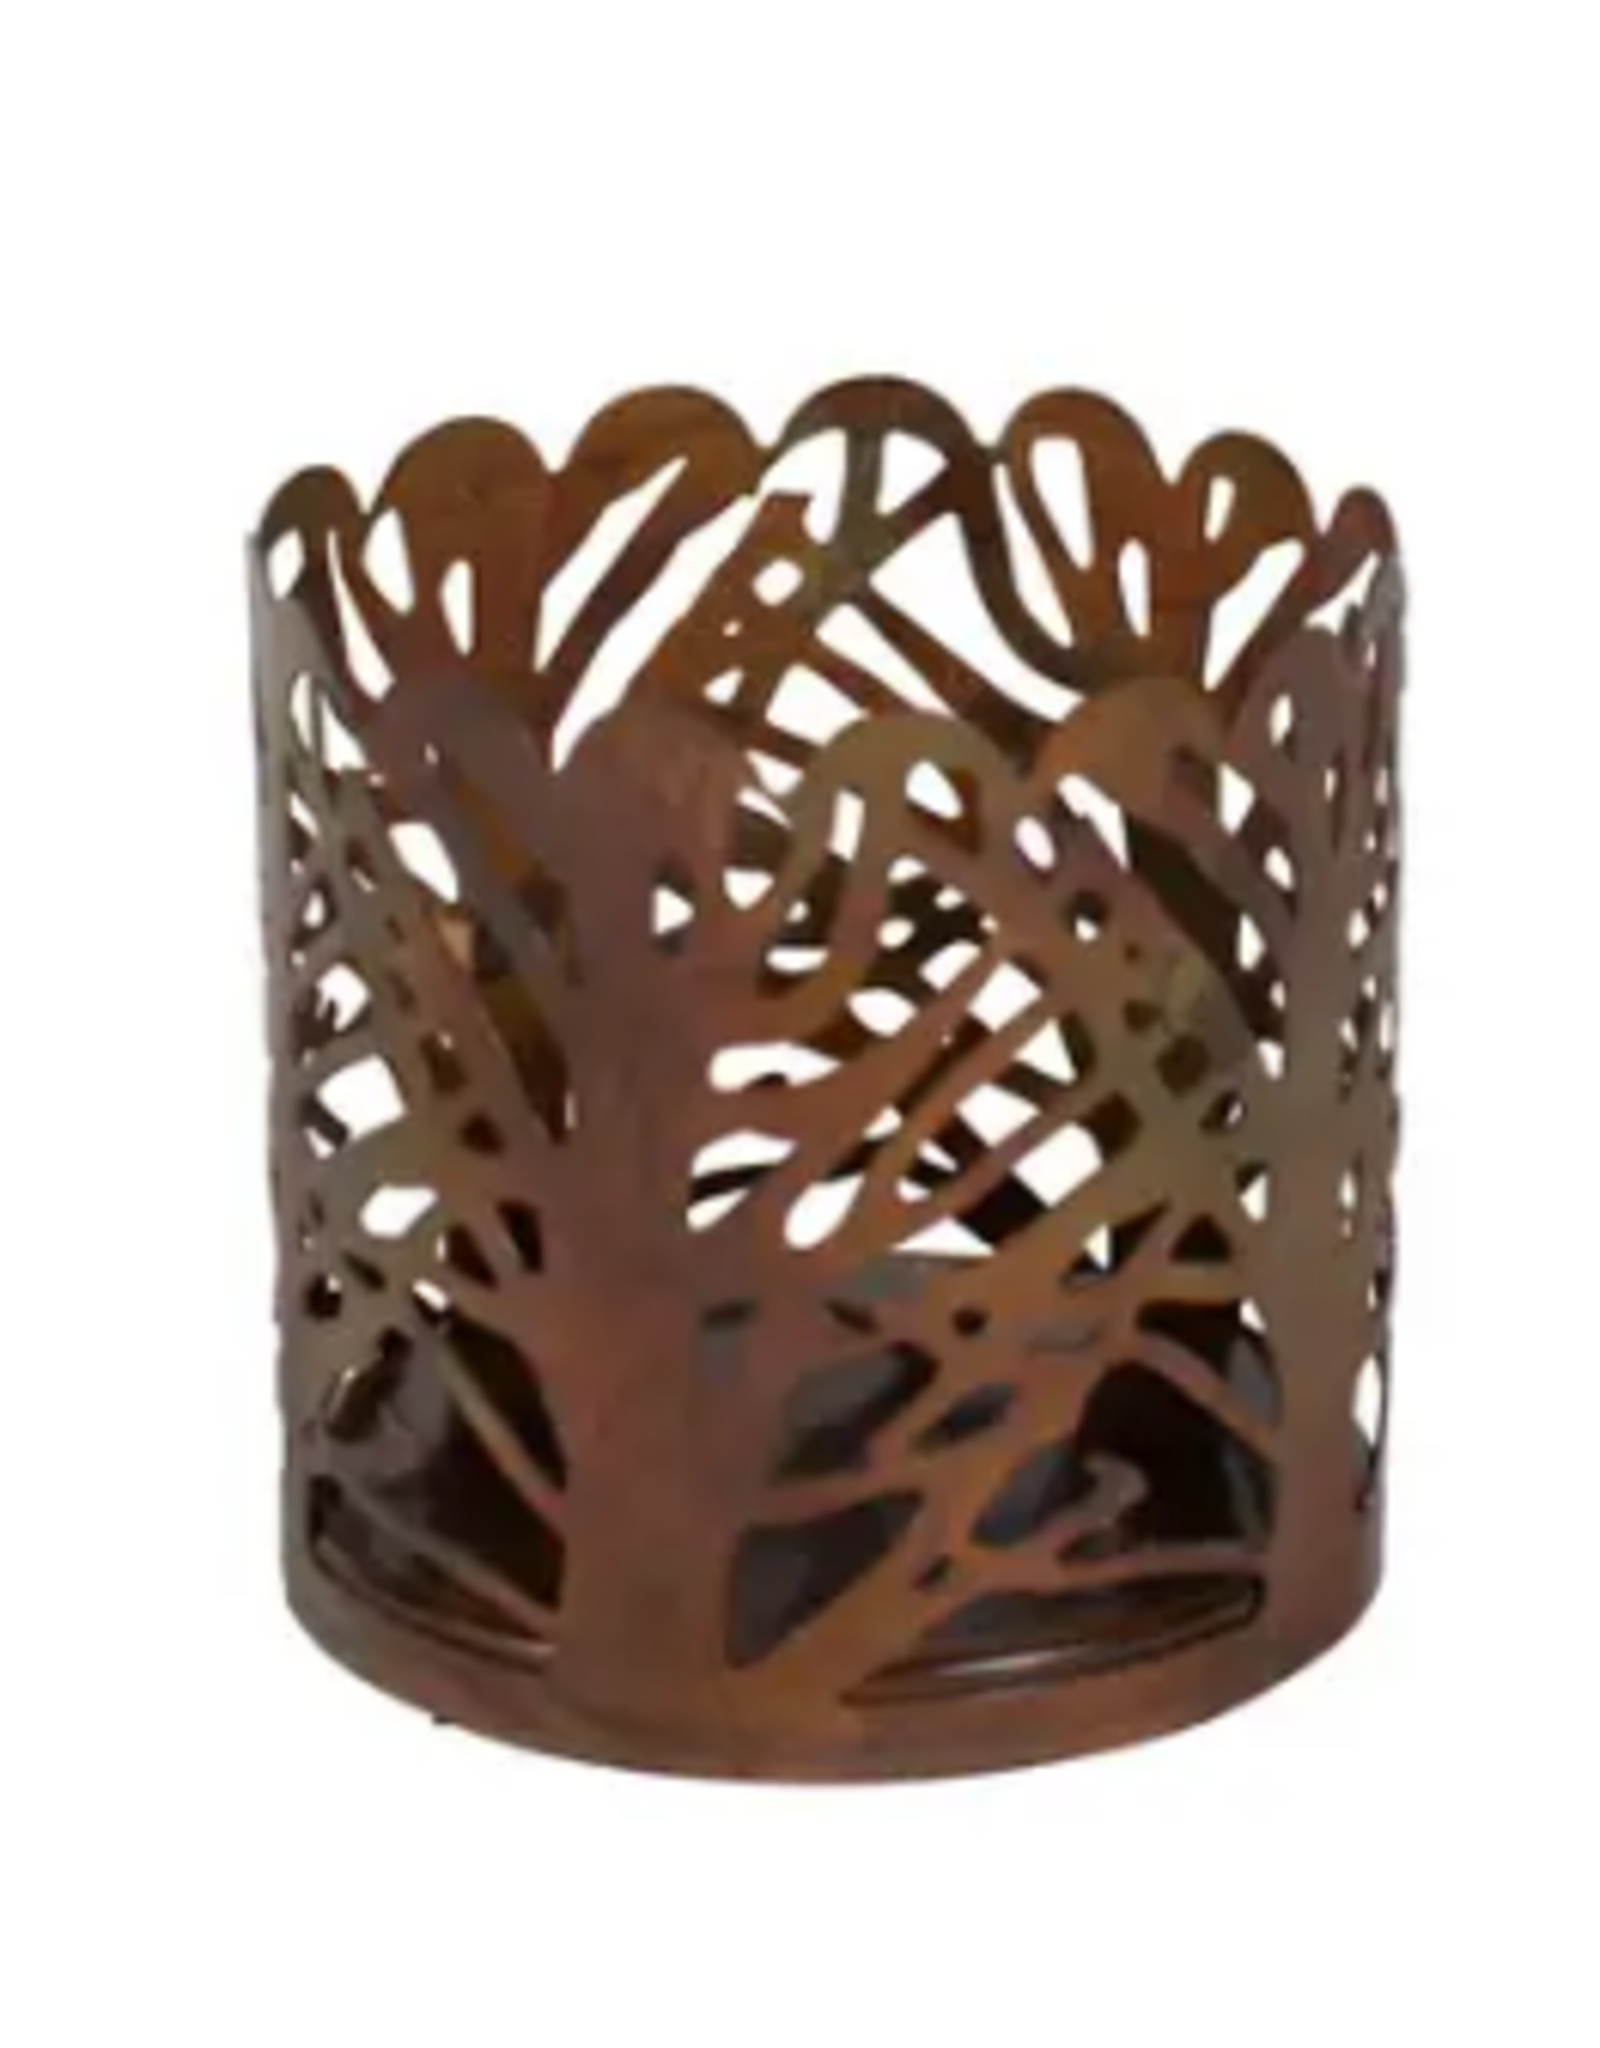 India Forest Candle Holder, India Small